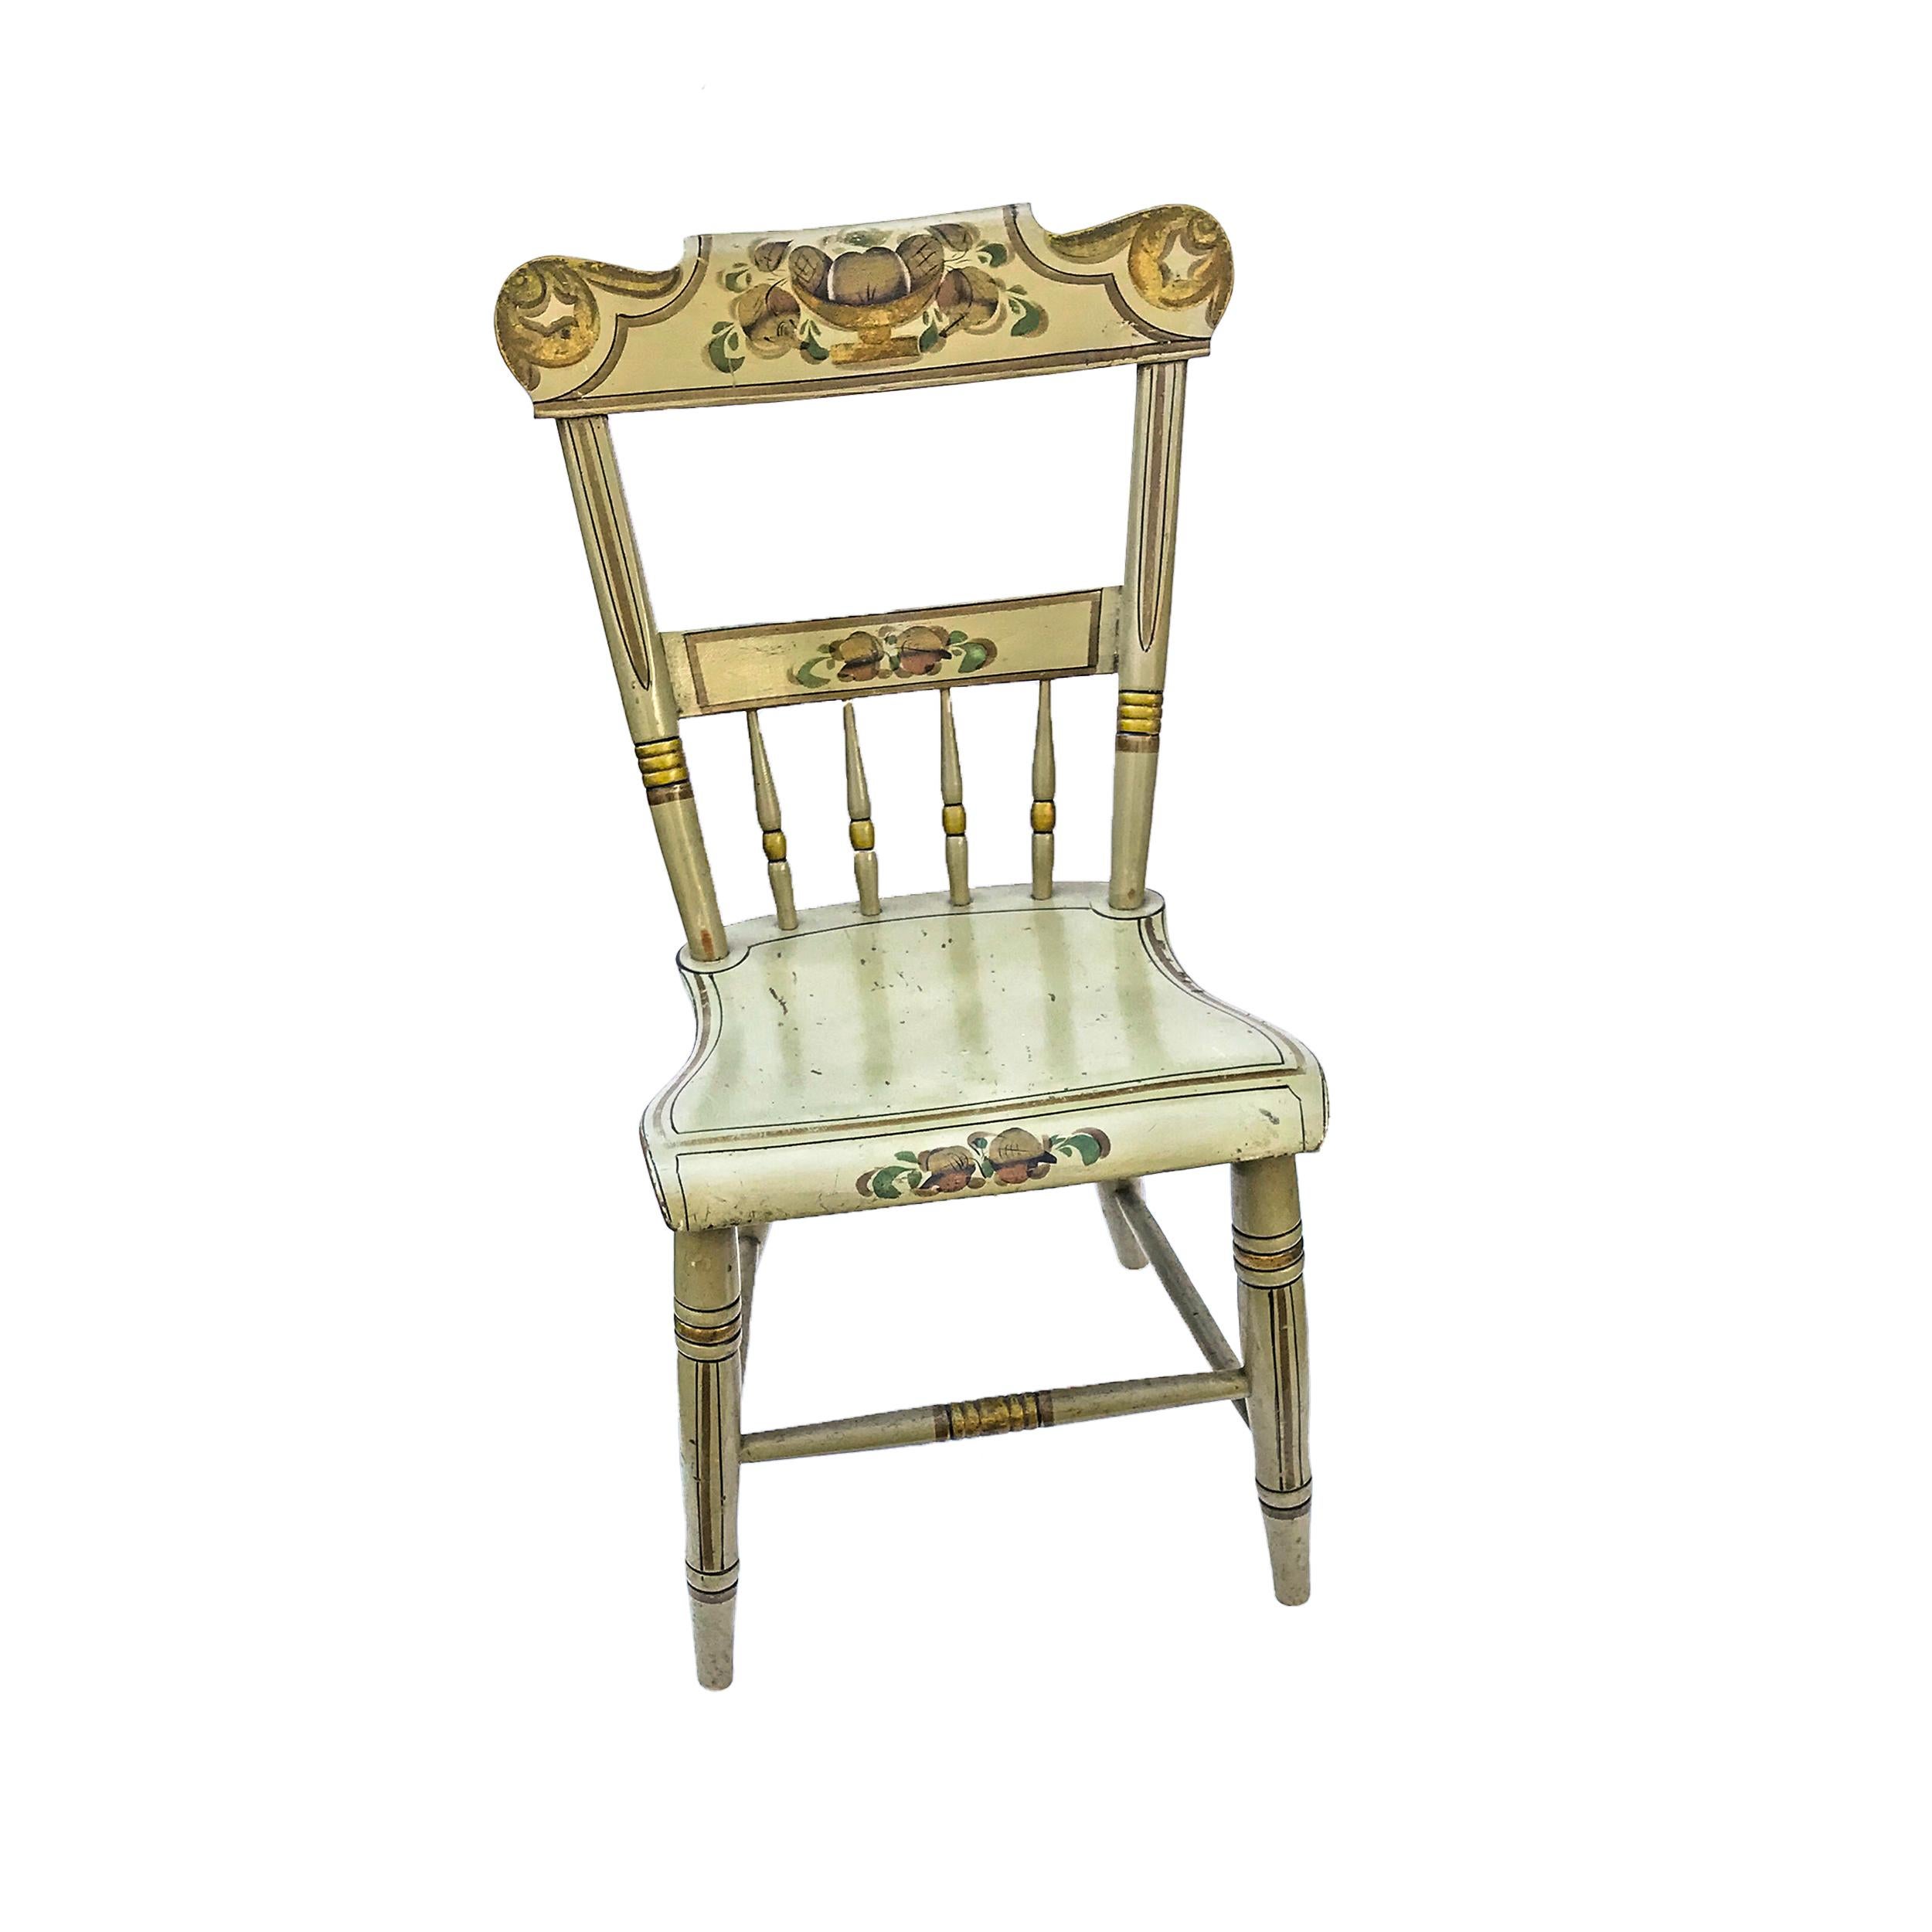 Rustic Set of Six Paint Decorated Plank Seat Chairs, circa 1860